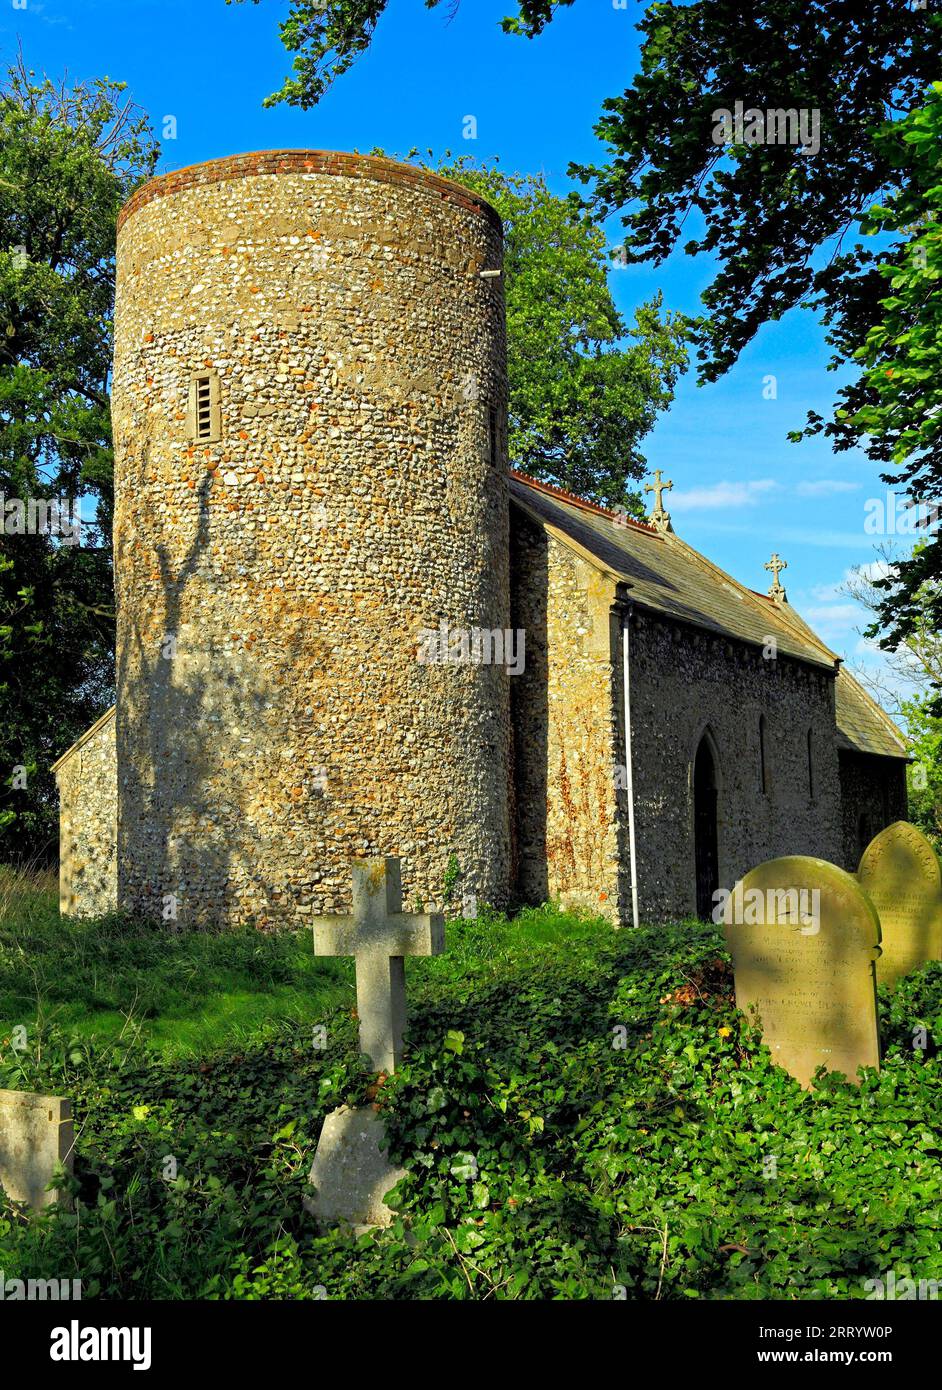 Barmer, Norfolk, 12th century Norman, round tower, church, England, UK, architecture Stock Photo